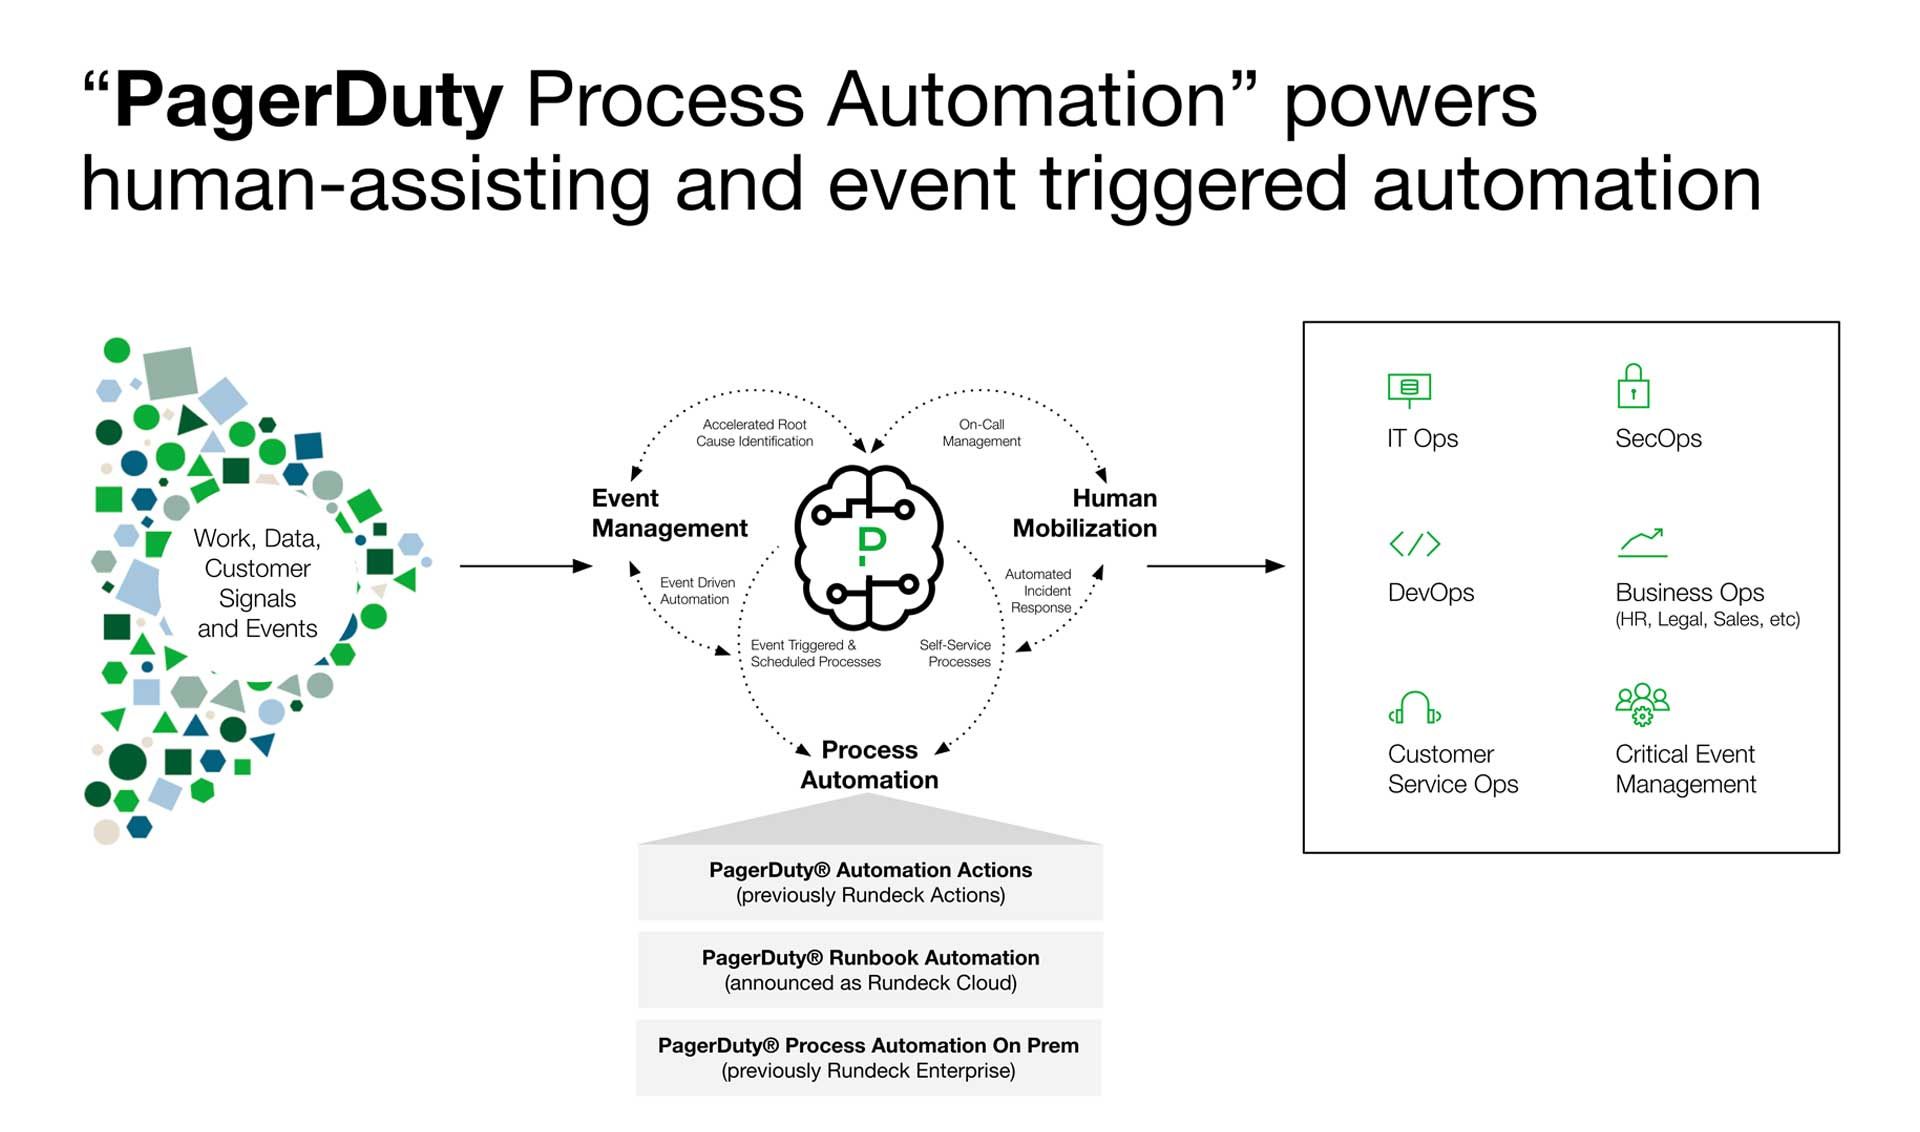 pagerduty-process-automation-powers-human-assisting-and-event-triggered-automation-diagram-small